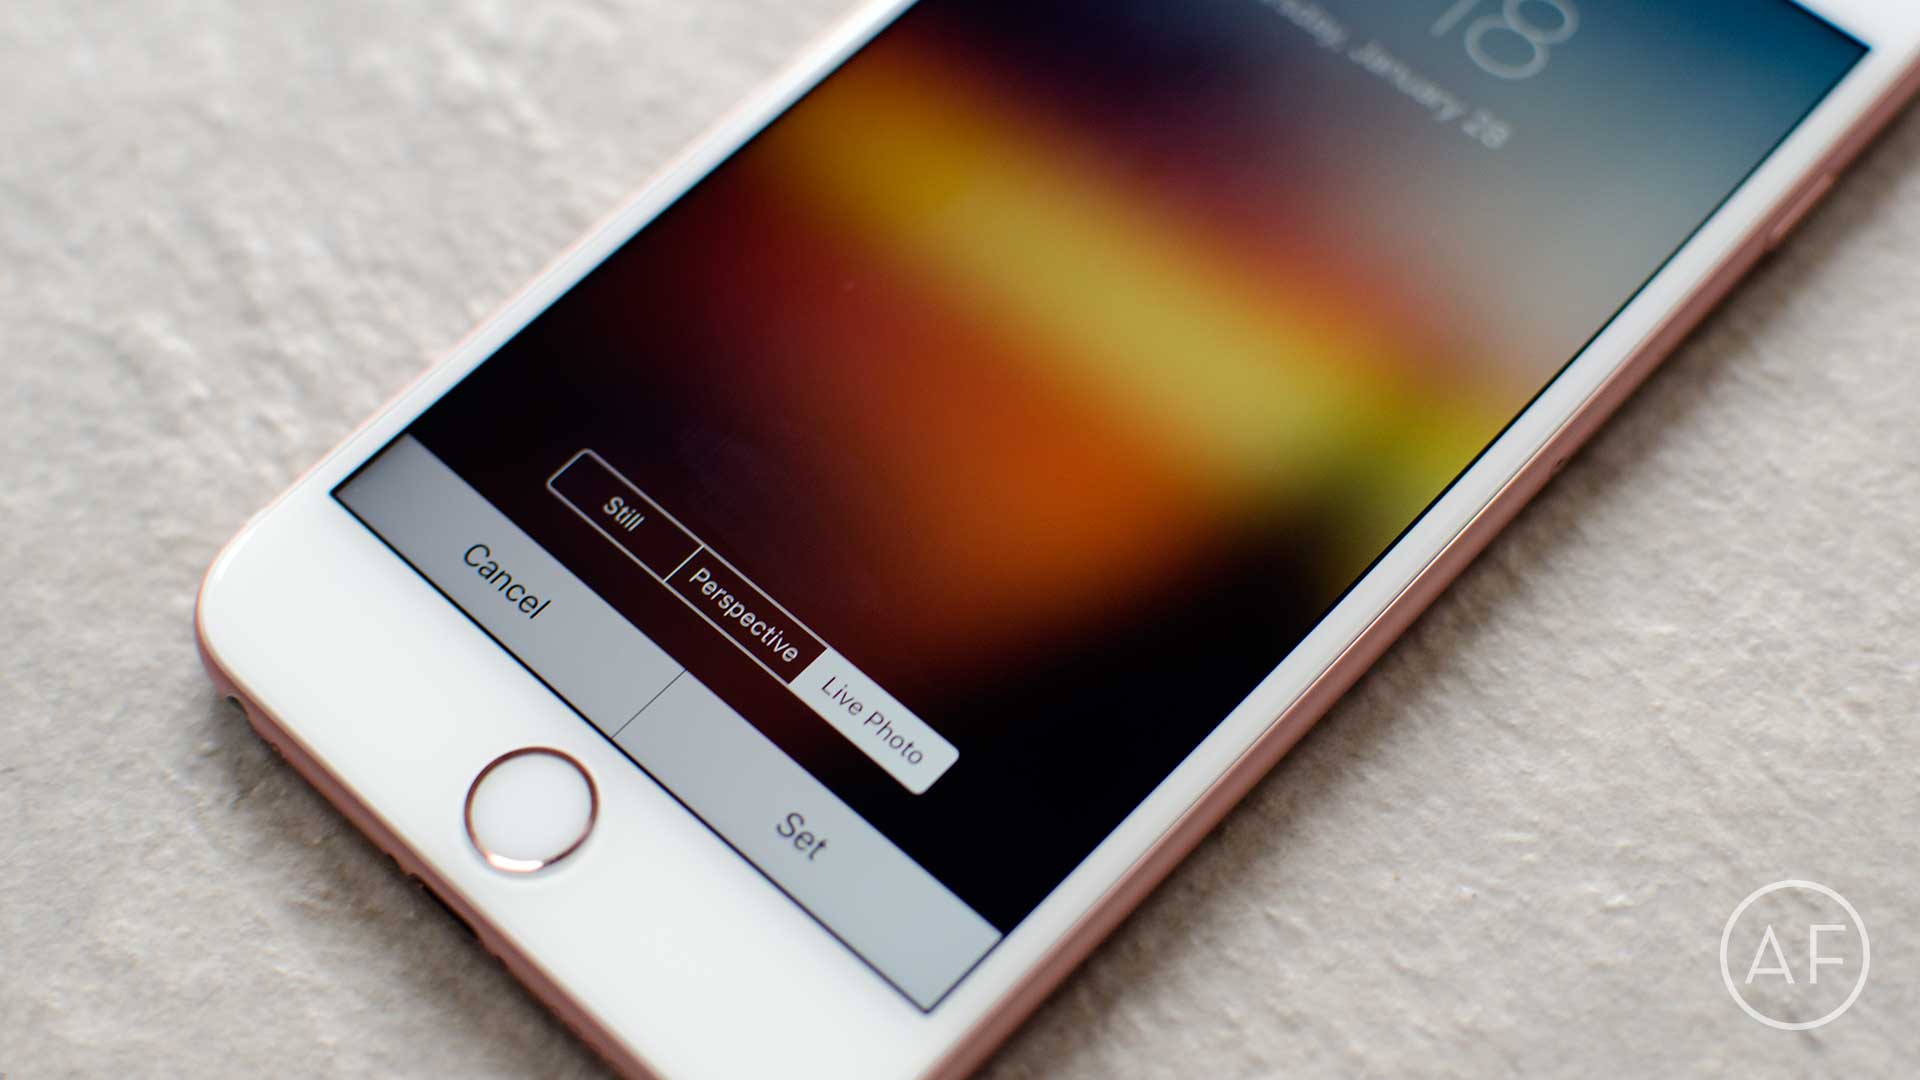 How to make any picture a Live Wallpaper on iPhone 6s and iPhone 1920x1080